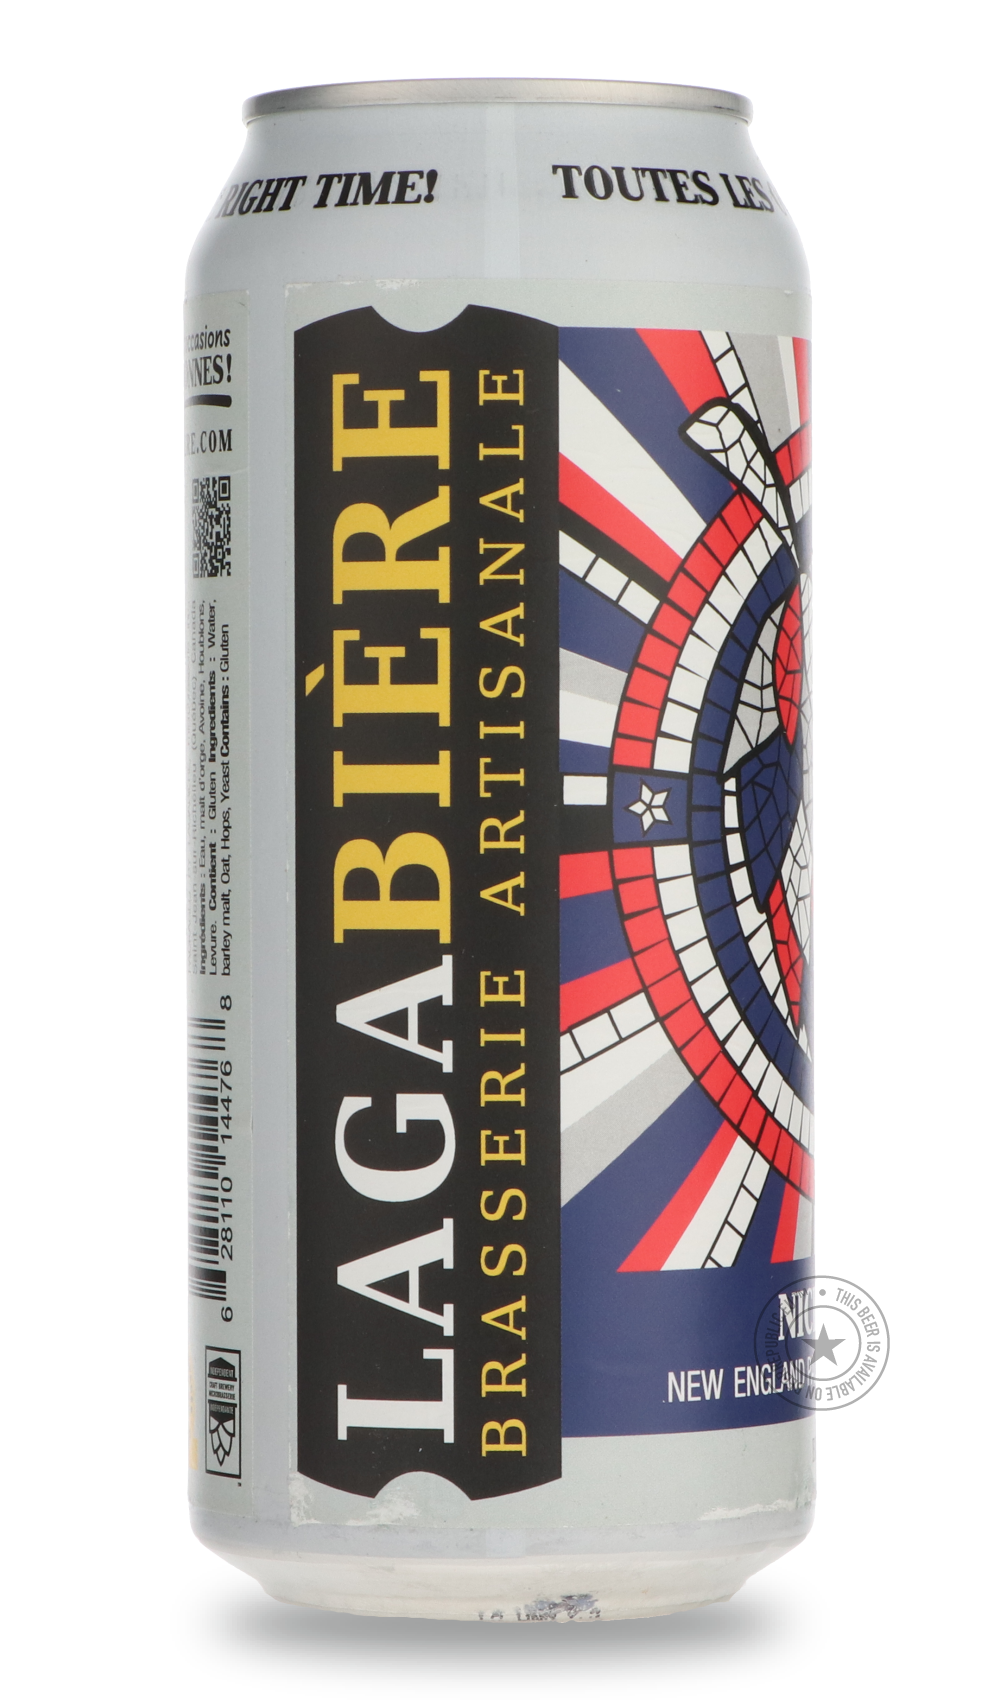 -Lagabière- Nice N'Hazy-Pale- Only @ Beer Republic - The best online beer store for American & Canadian craft beer - Buy beer online from the USA and Canada - Bier online kopen - Amerikaans bier kopen - Craft beer store - Craft beer kopen - Amerikanisch bier kaufen - Bier online kaufen - Acheter biere online - IPA - Stout - Porter - New England IPA - Hazy IPA - Imperial Stout - Barrel Aged - Barrel Aged Imperial Stout - Brown - Dark beer - Blond - Blonde - Pilsner - Lager - Wheat - Weizen - Amber - Barley W